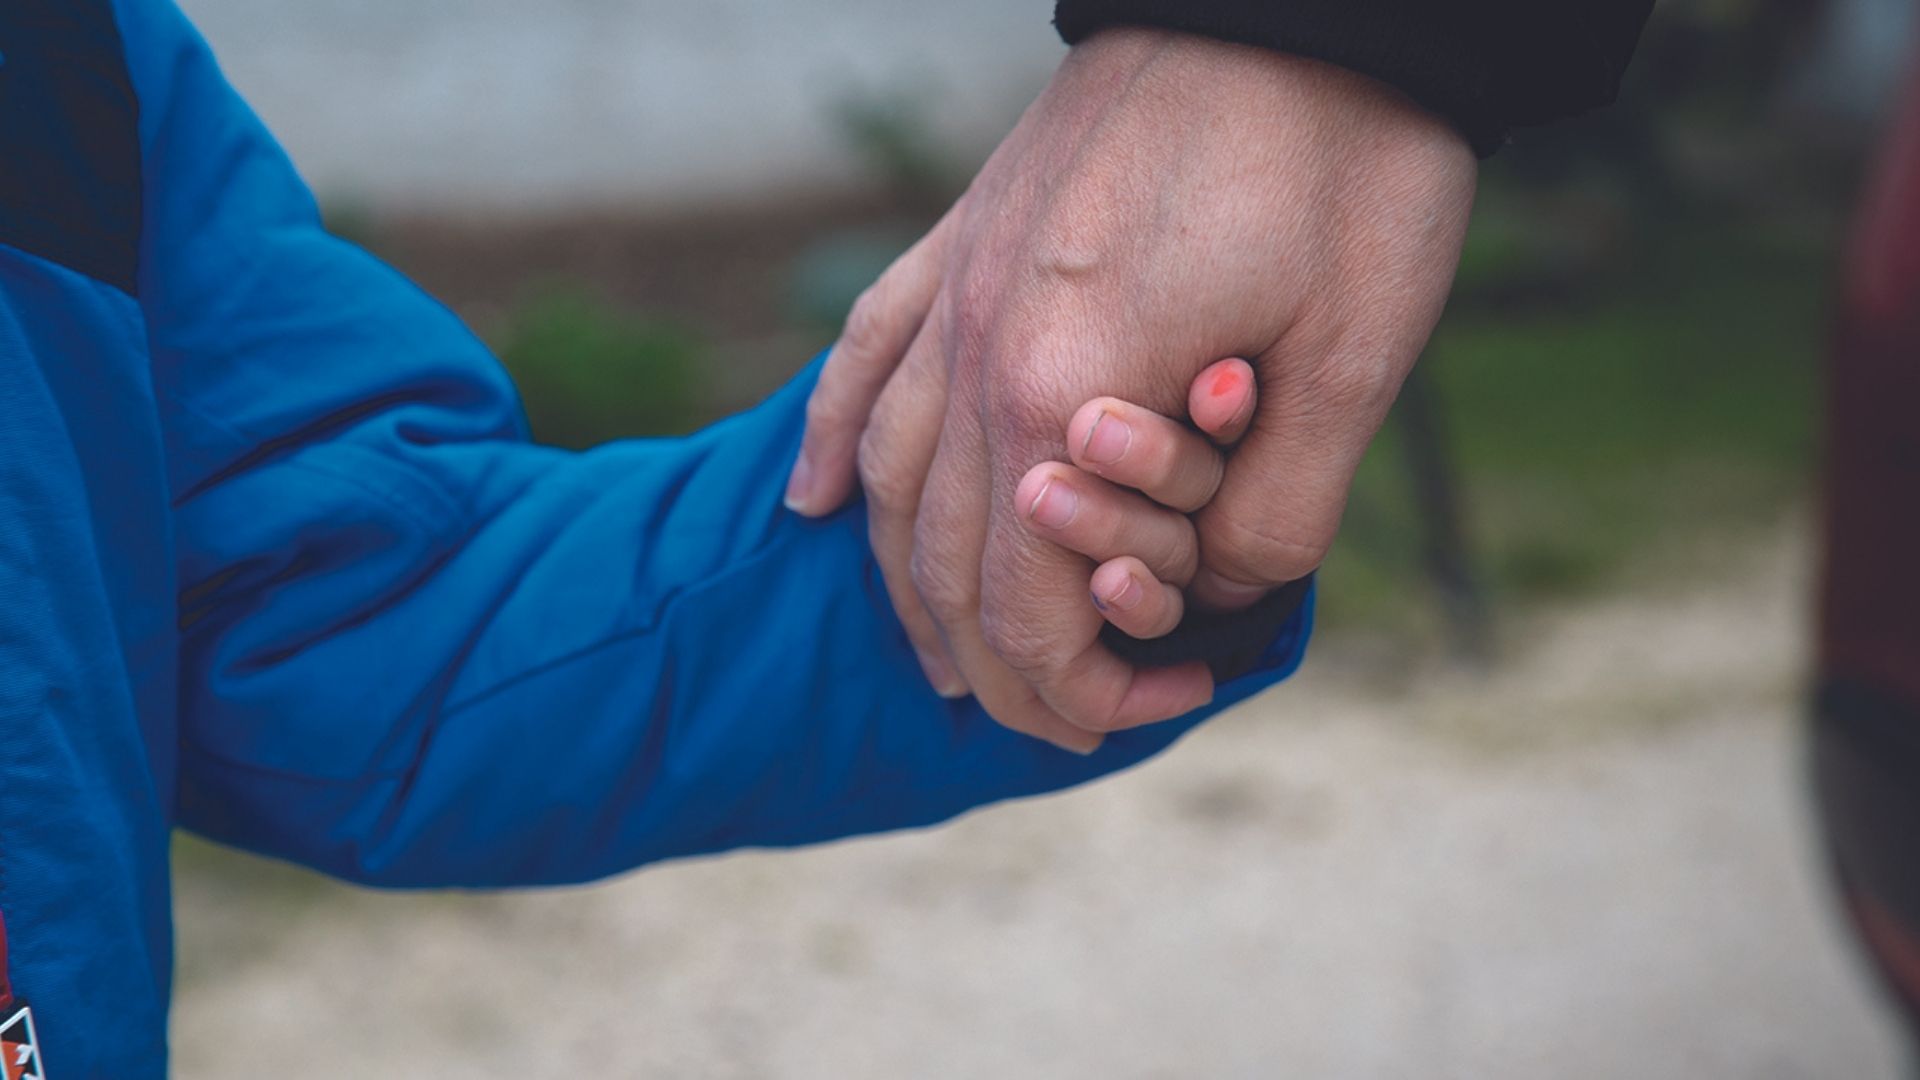 A child's hand being held by an adult's hand